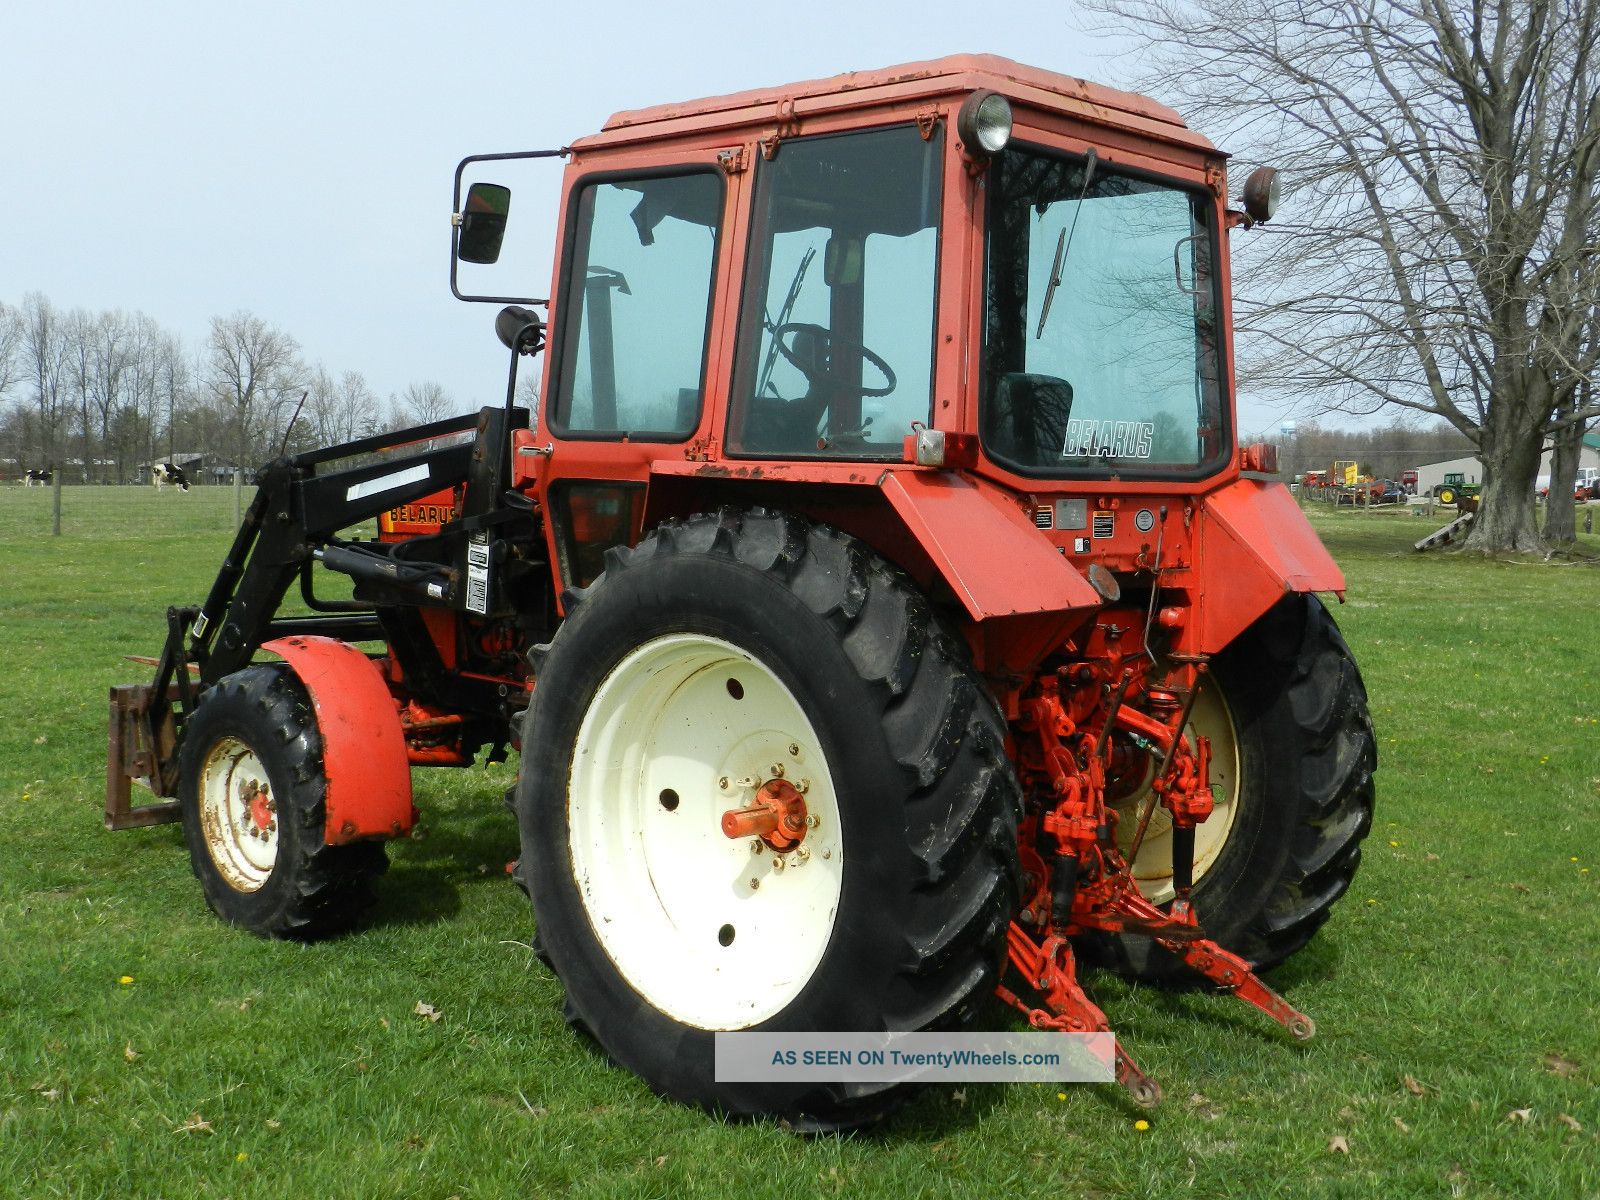 Belarus 925 Tractor With Cab & Front Loader - 4x4 - 1537 Hours ...